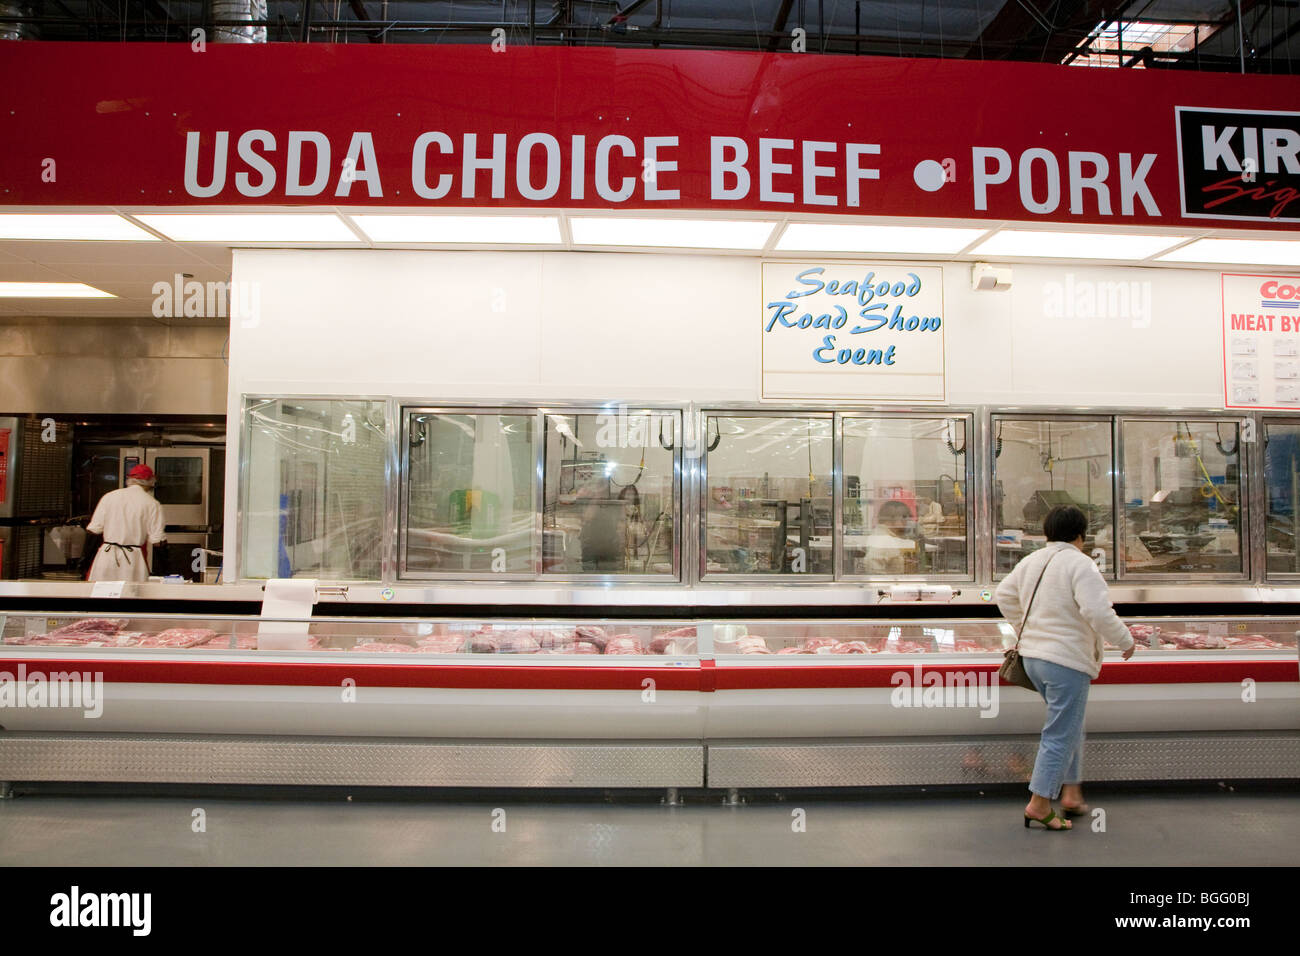 Meat and poultry section at Costco selling USDA Choice Grade Beef. Costco, California, USA Stock Photo